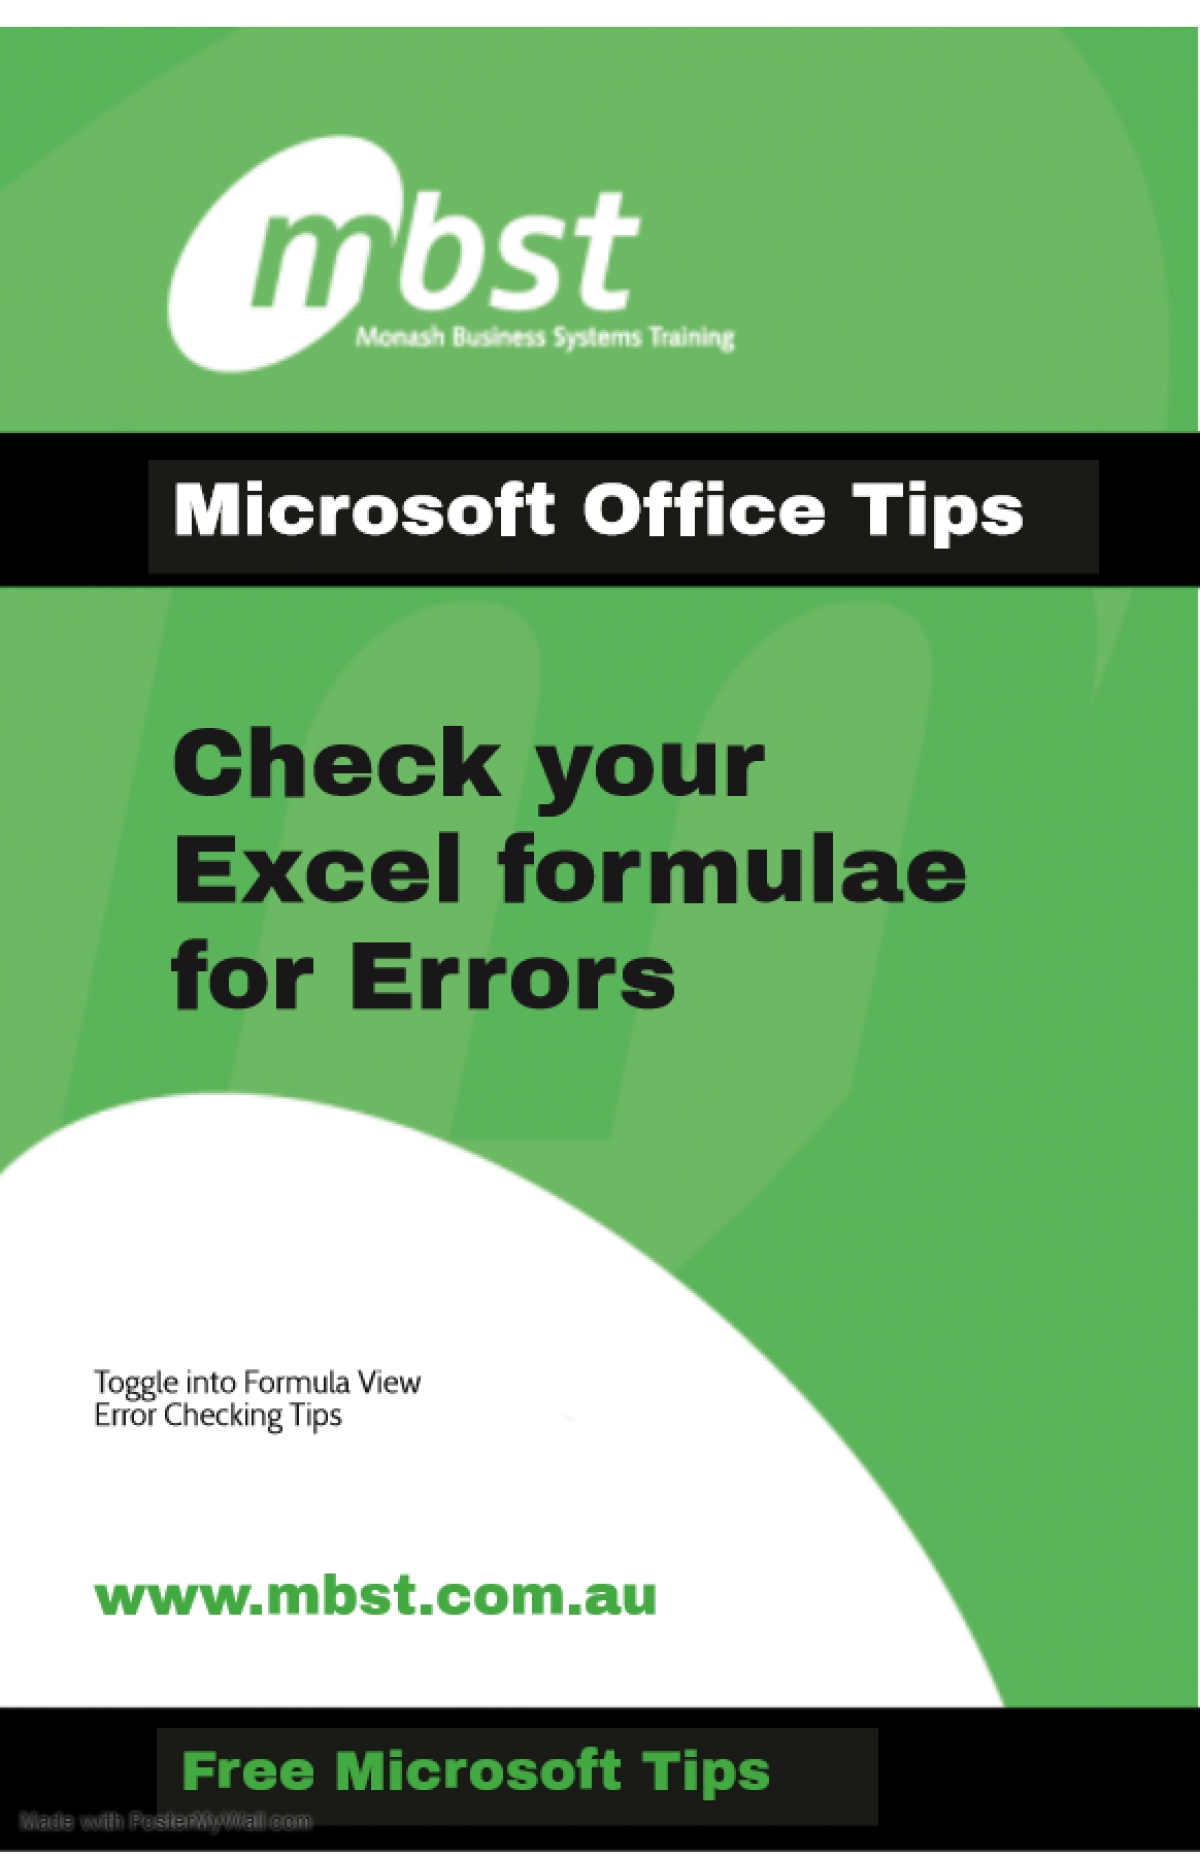 Check your Excel Formulae for Errors